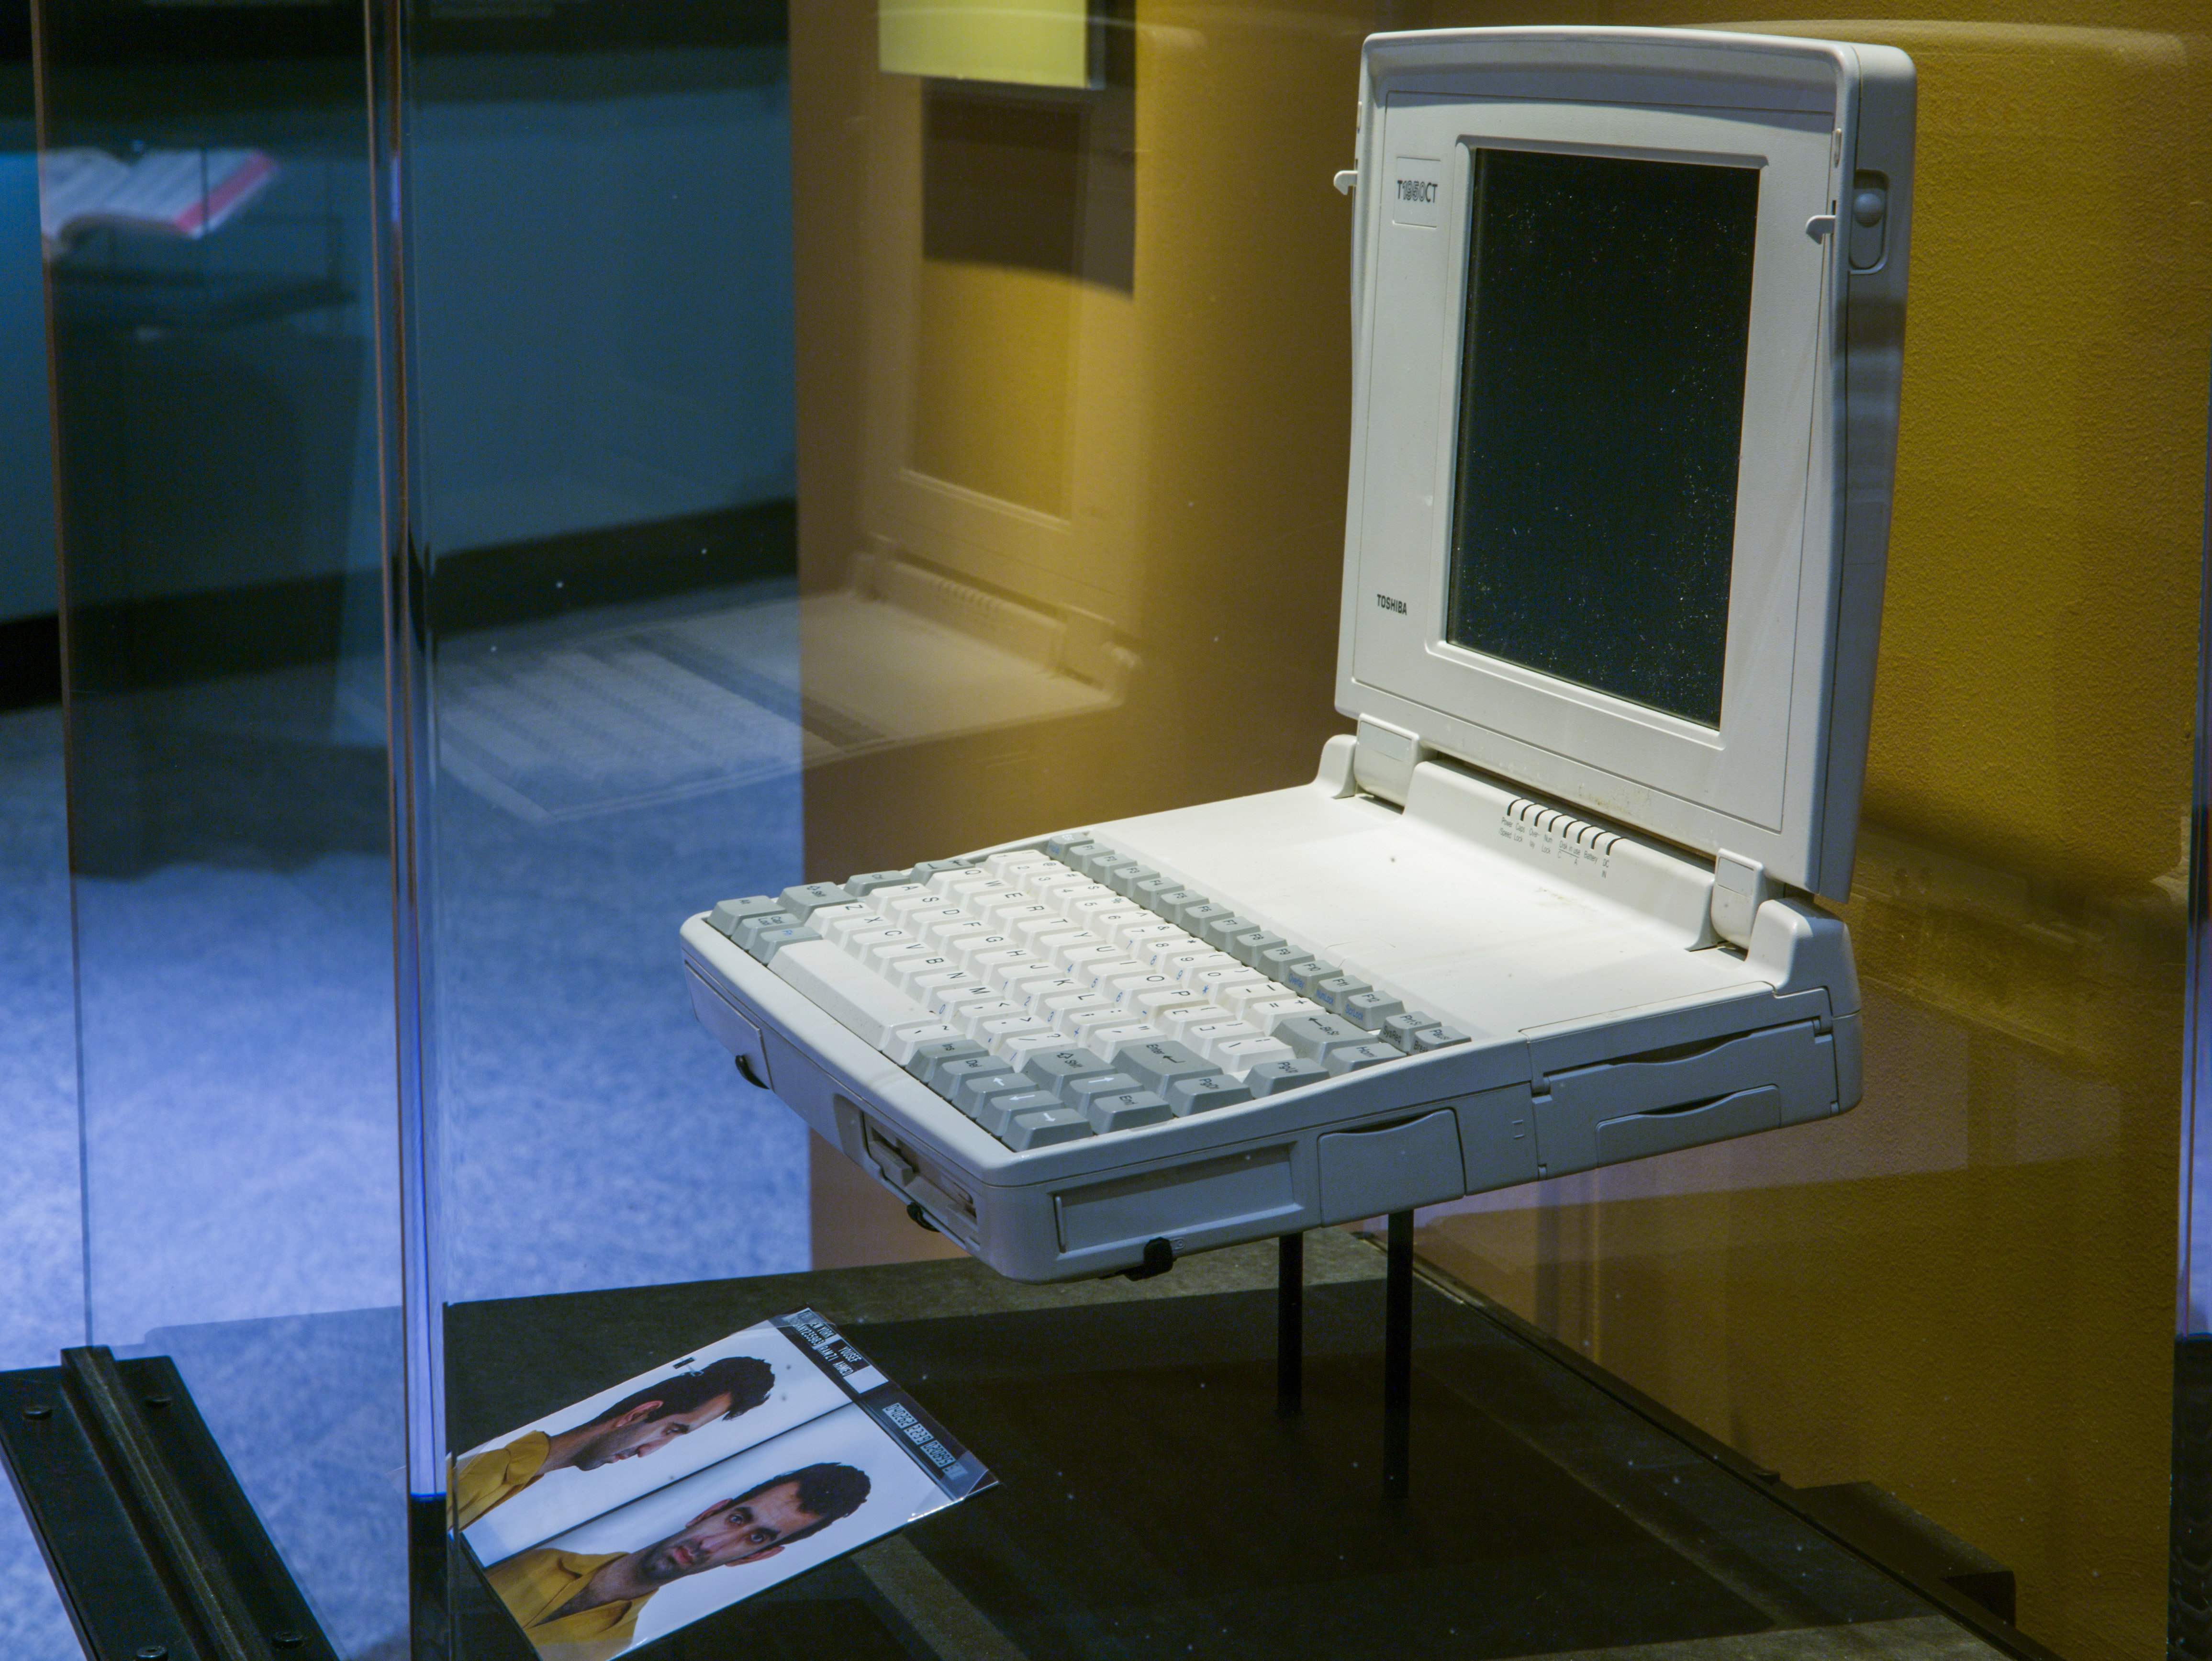 A laptop computer belonging to terrorist Ramzi Yousef is seen in a display case at the Museum’s Historical Exhibition. The laptop is an older model, dating back to at least the early 1990s. An image of Yousef is displayed below it.